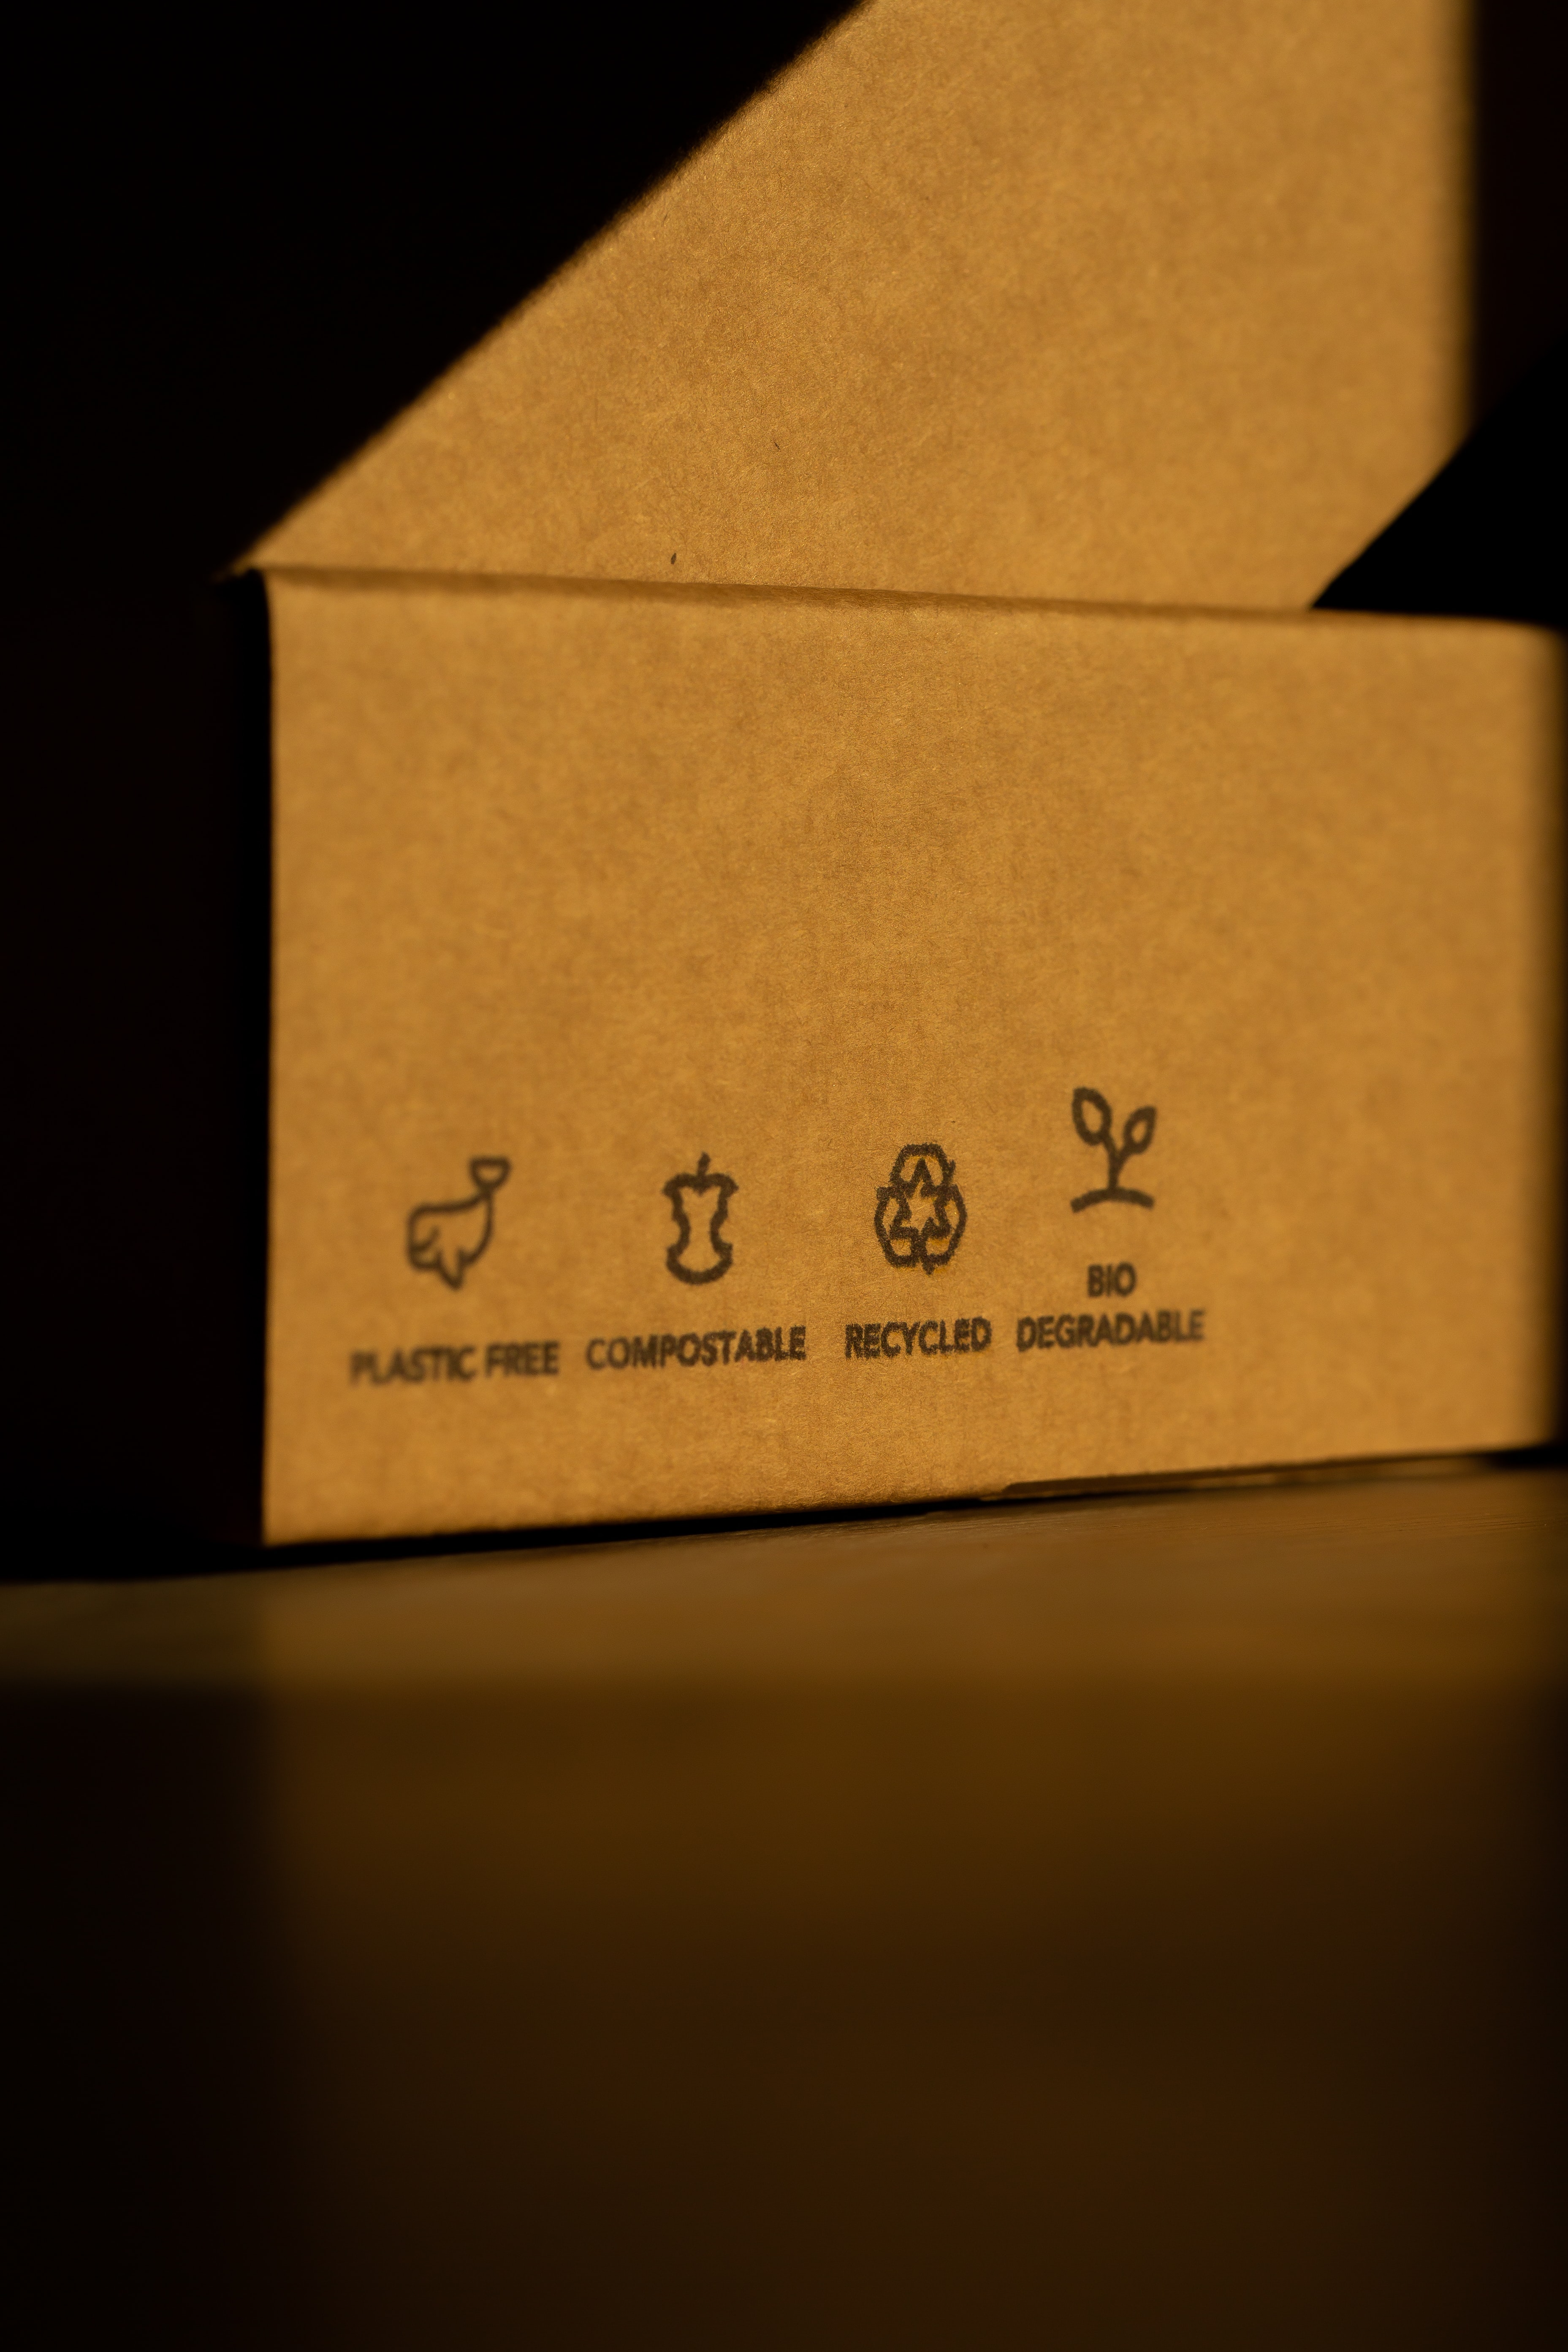 Sustainable packaging: cardboard box with icons informing about recycling, biodegradability and being eco.